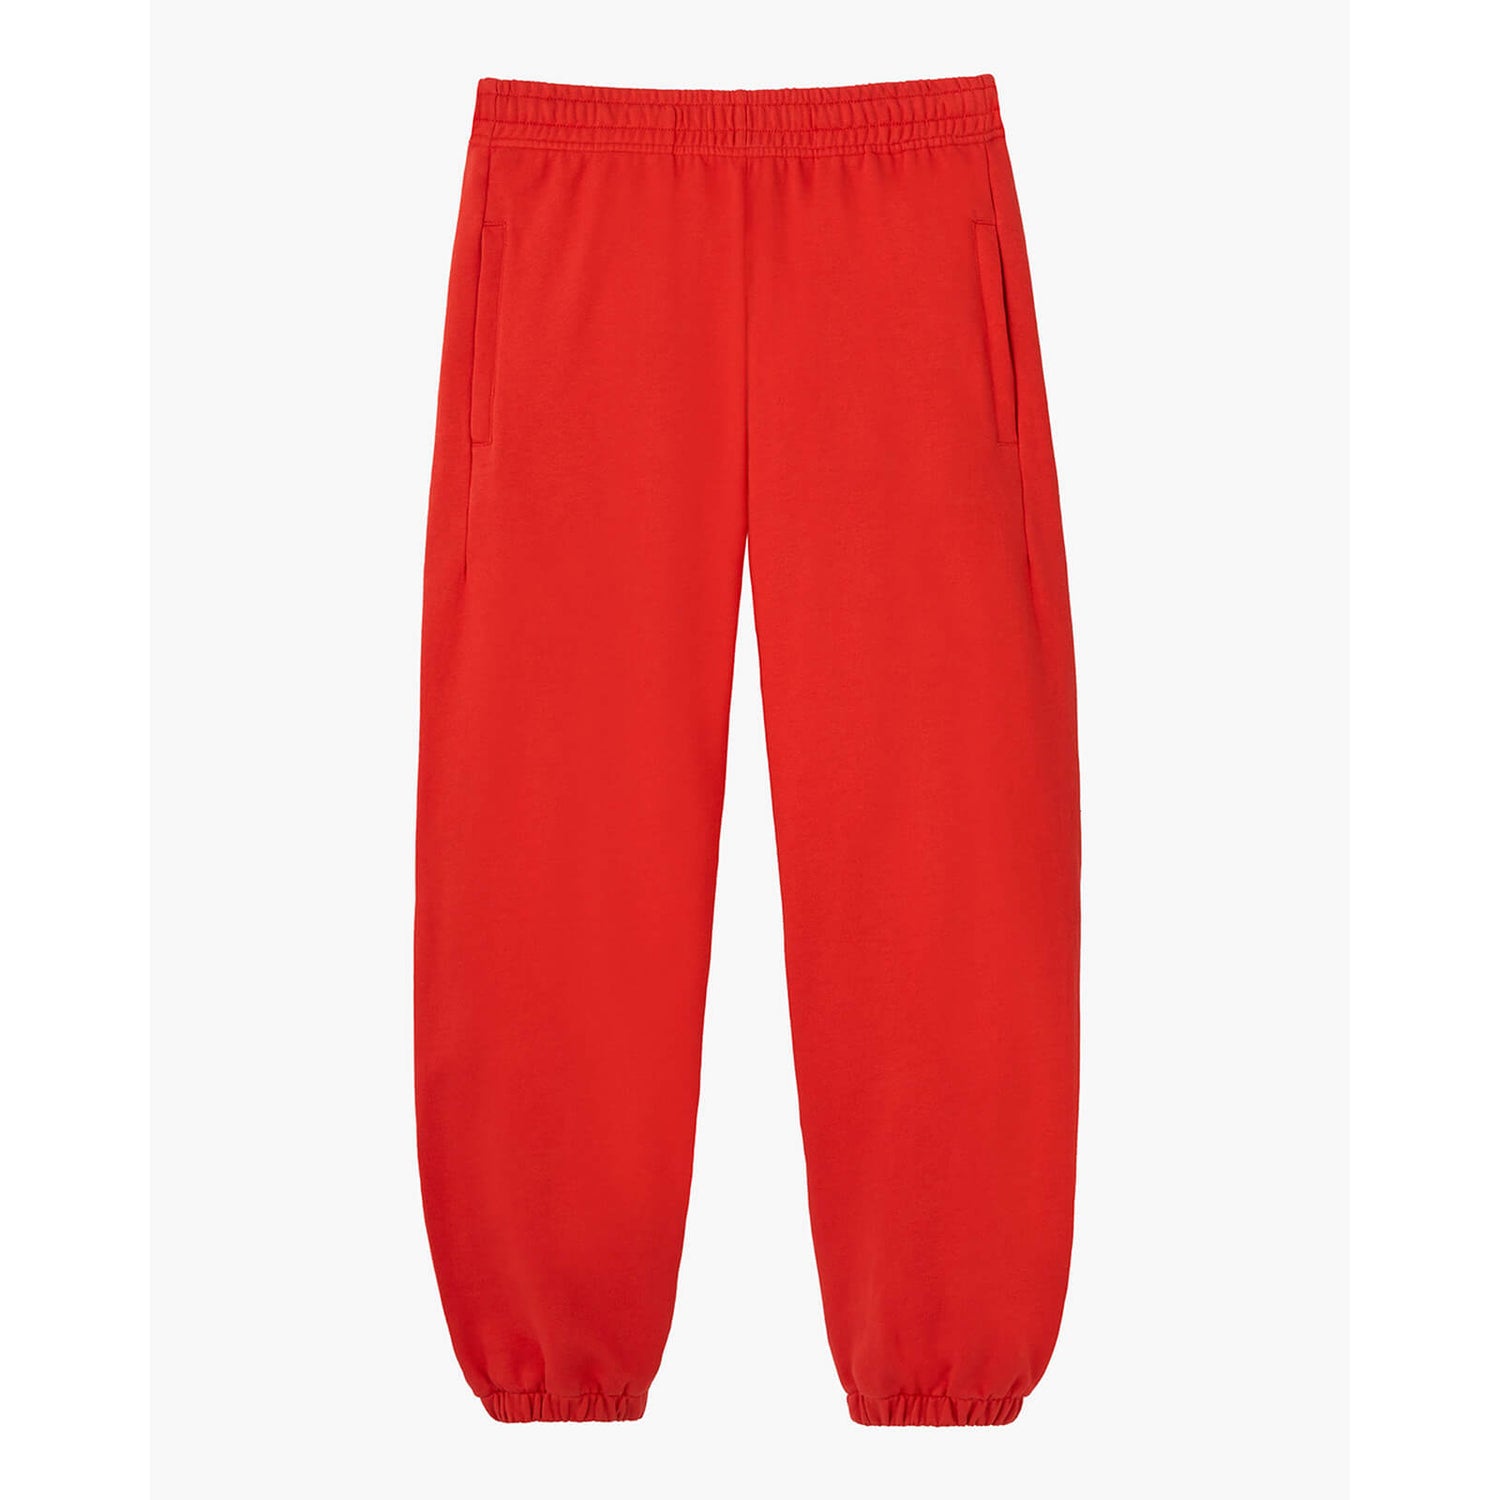 Les Girls Les Boys Women's Loopback Loose Fit Joggers - Red - XS